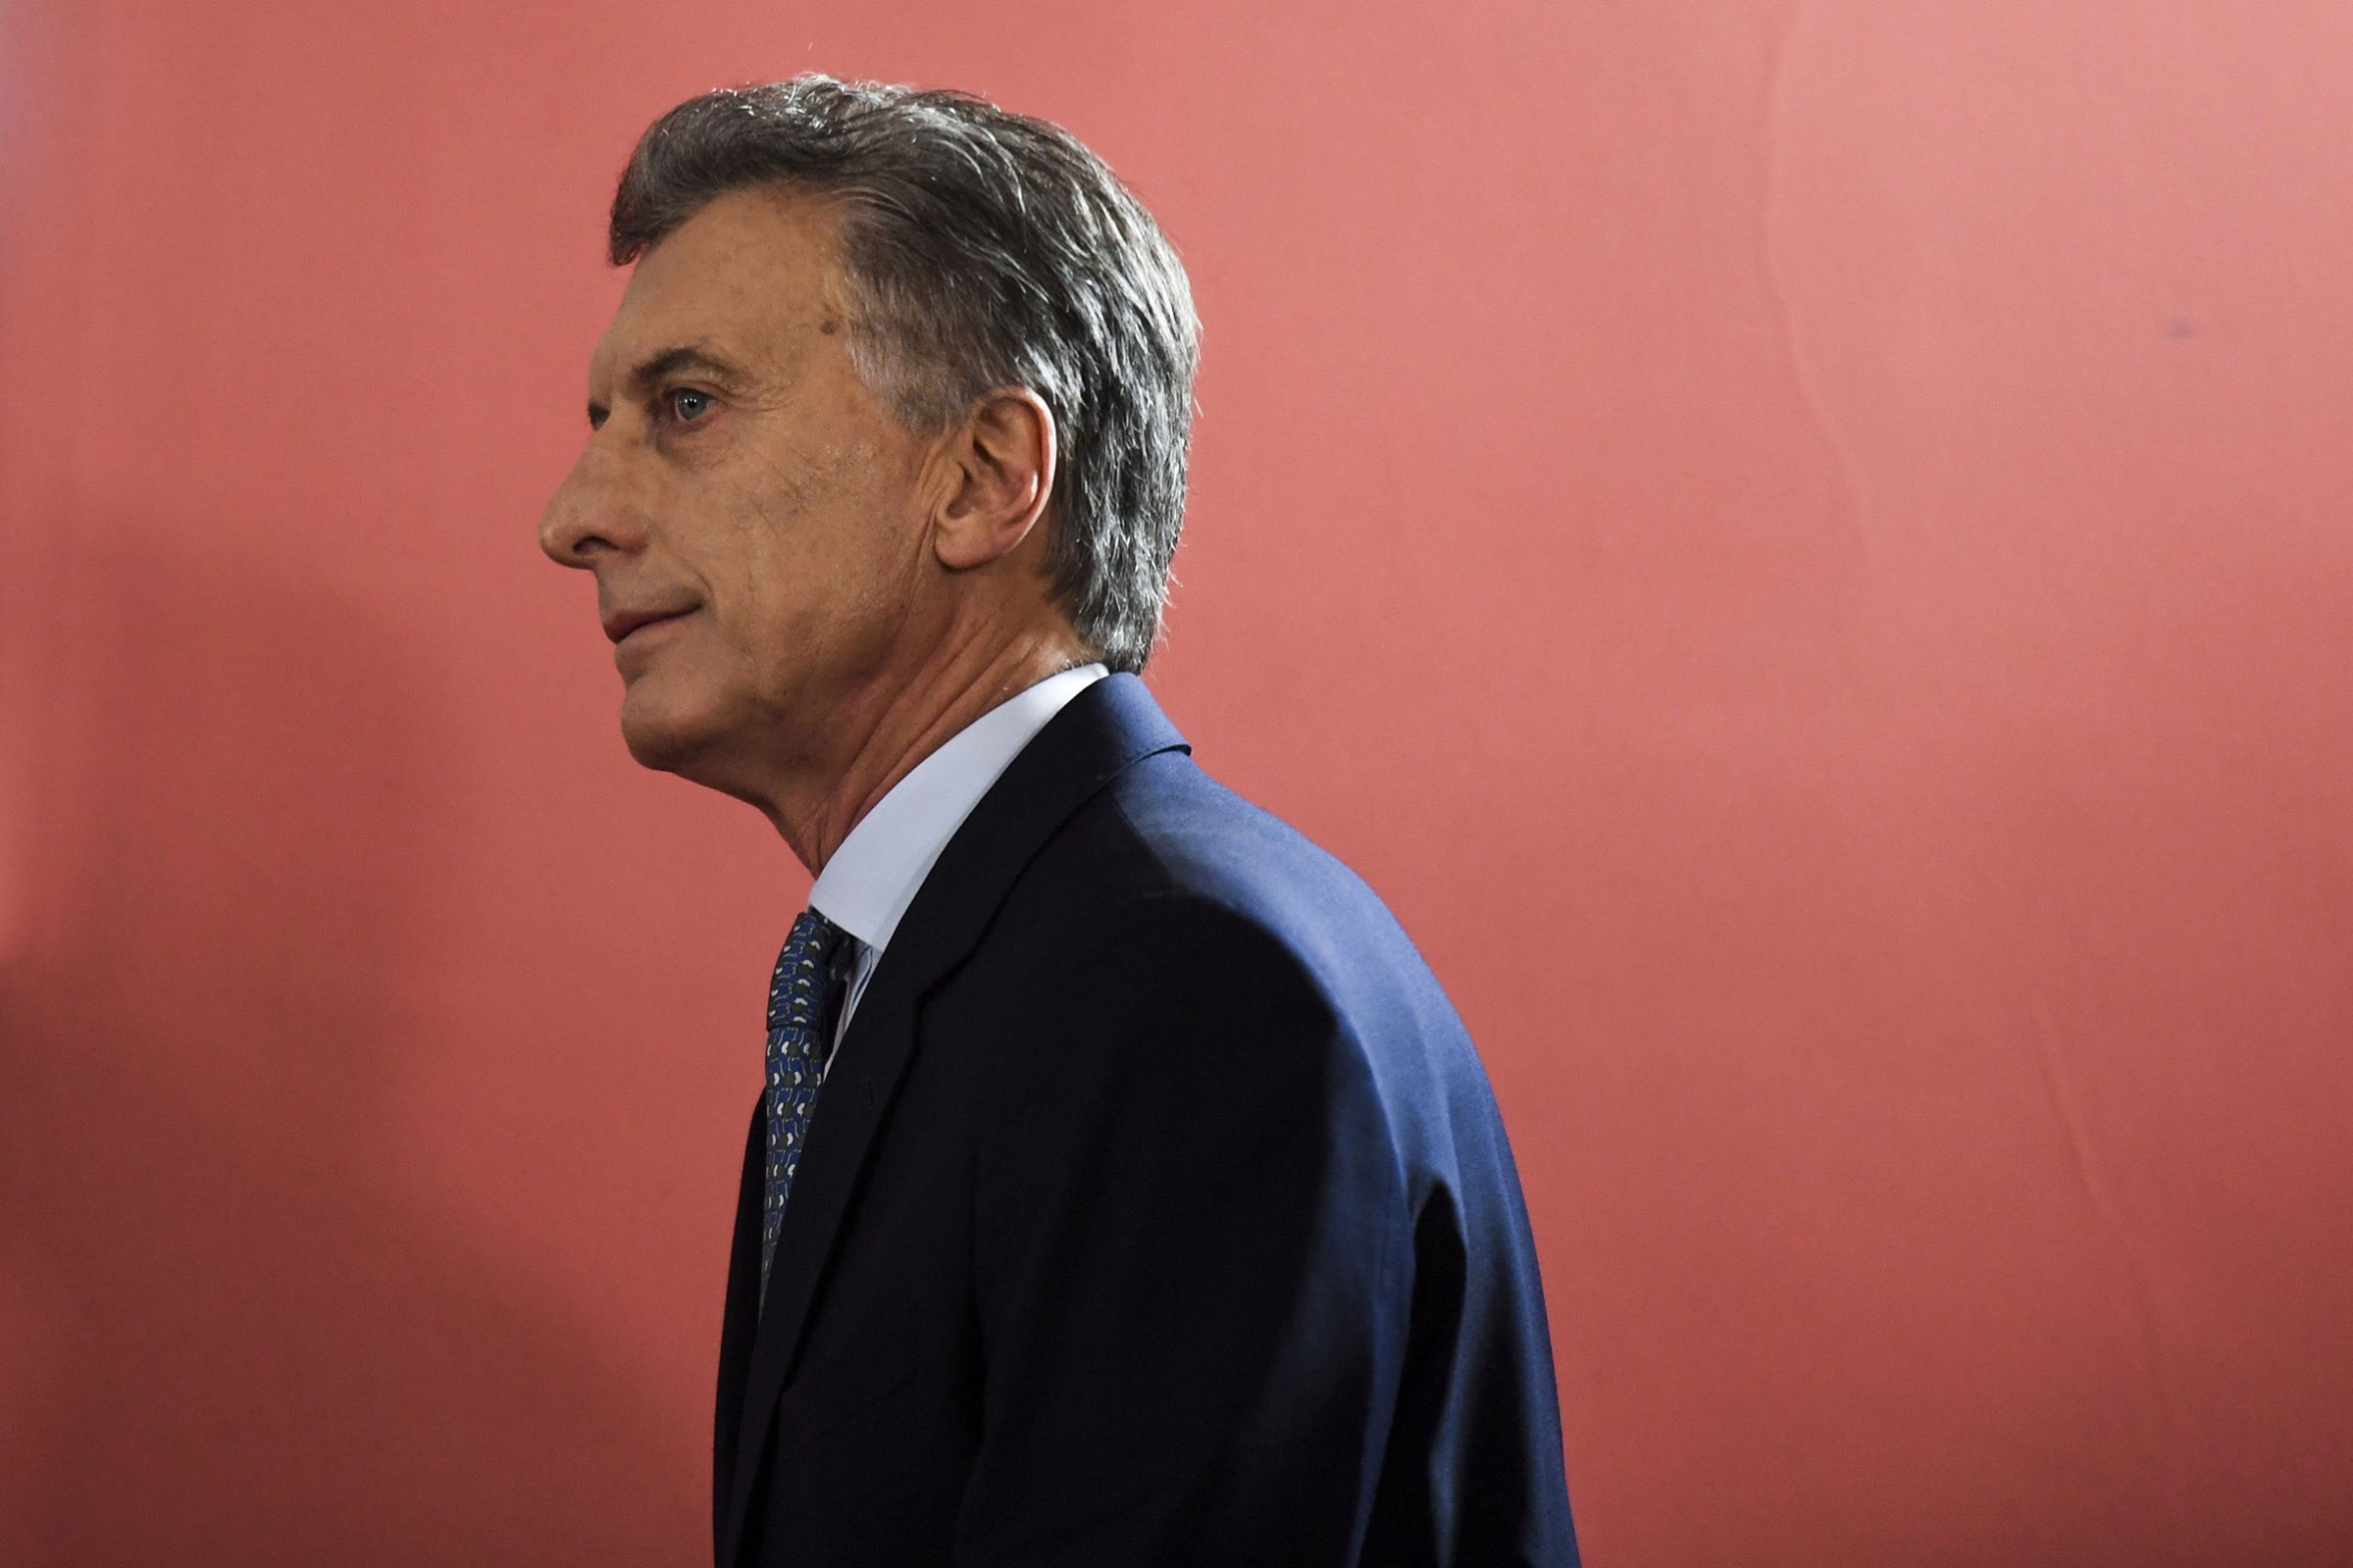 Argentina's President Mauricio Macri arrives to deliver a statement at Casa Rosada government palace in Buenos Aires, on September 27, 2018.